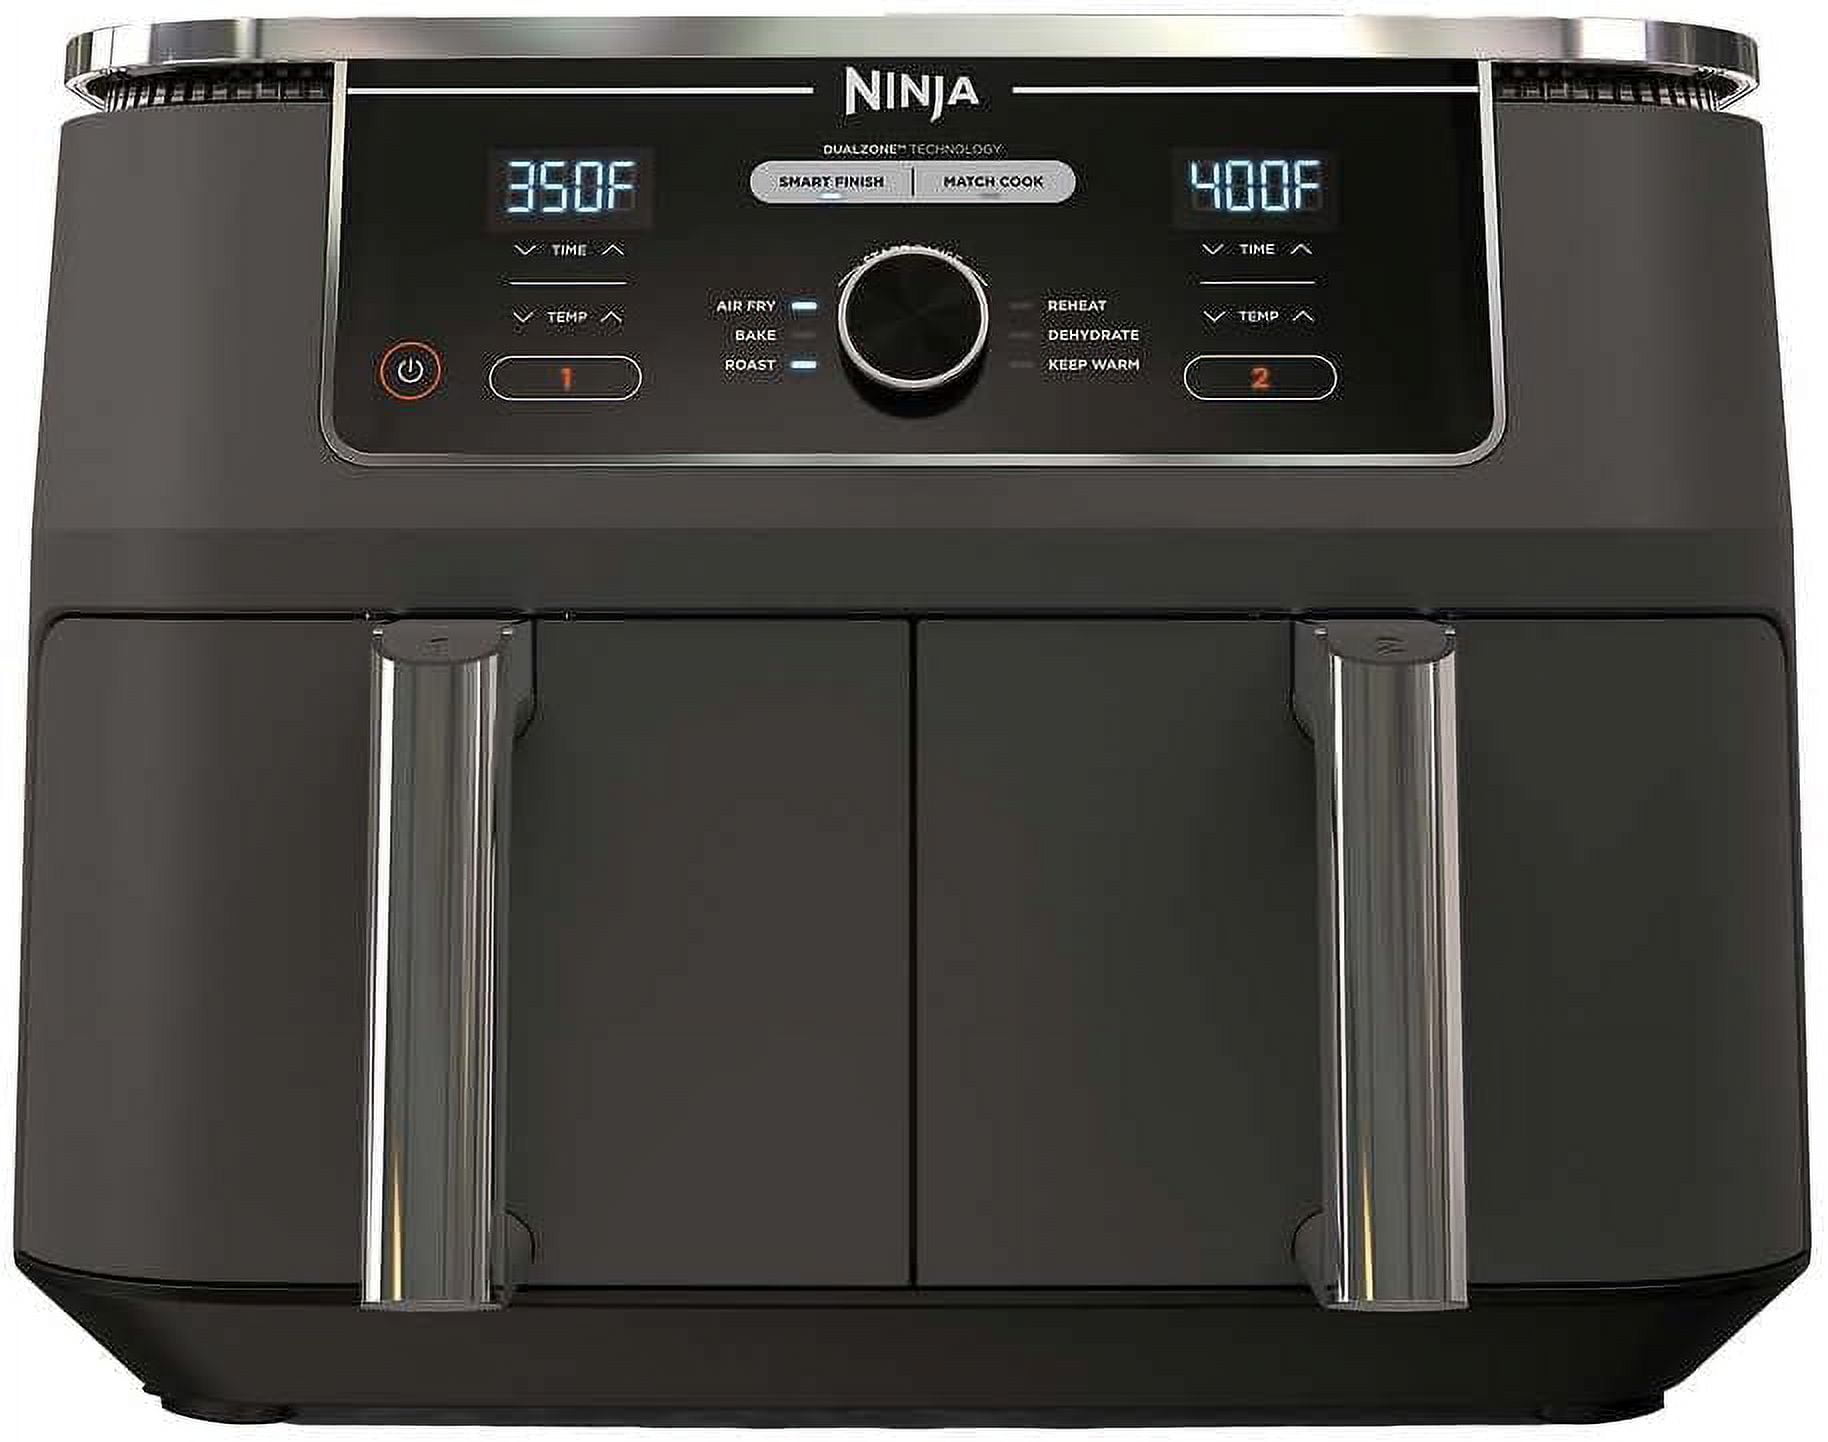  Ninja AD350CO Foodi 10 Quart 6-in-1 DualZone XL 2-Basket Air  Fryer with 2 Independent Frying Baskets, Match Cook & Smart Finish to  Roast, Broil, Dehydrate for Quick, Easy Family-Sized Meals, Grey (